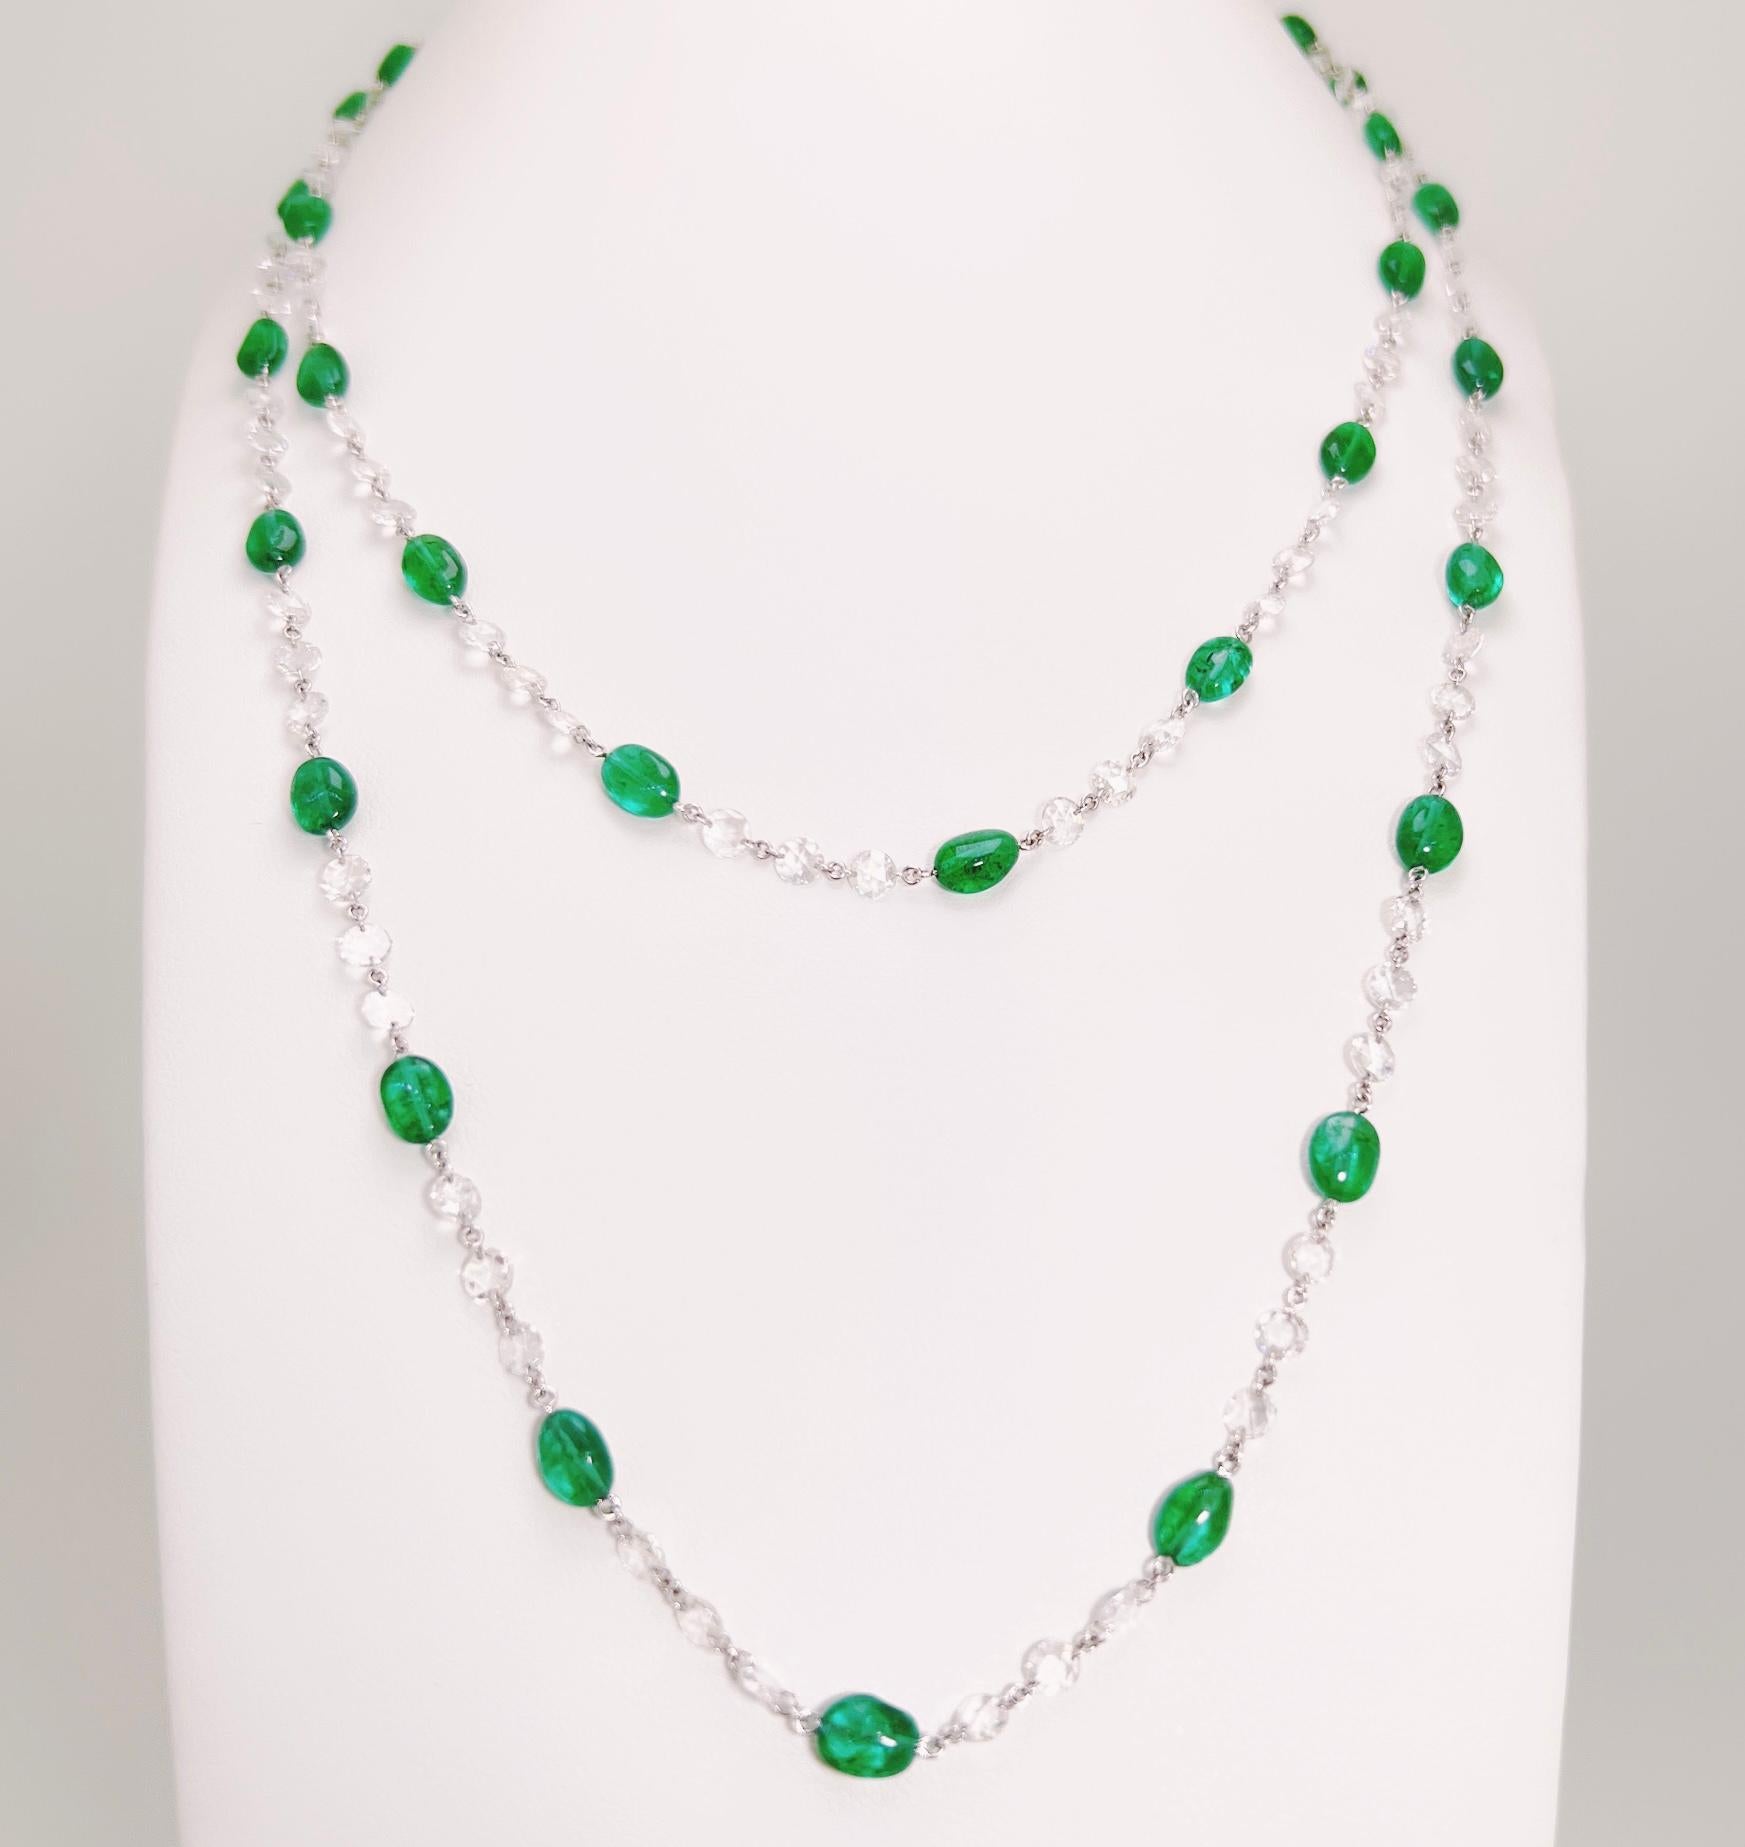 This is a stunning Emerald and Rose Cut Diamond Necklace weighing 34.24 carats in total.  This remarkable piece is so versatile - it can be worn as a long necklace or wrapped twice around the neck or even as bracelet.  Lively, radiant and lush